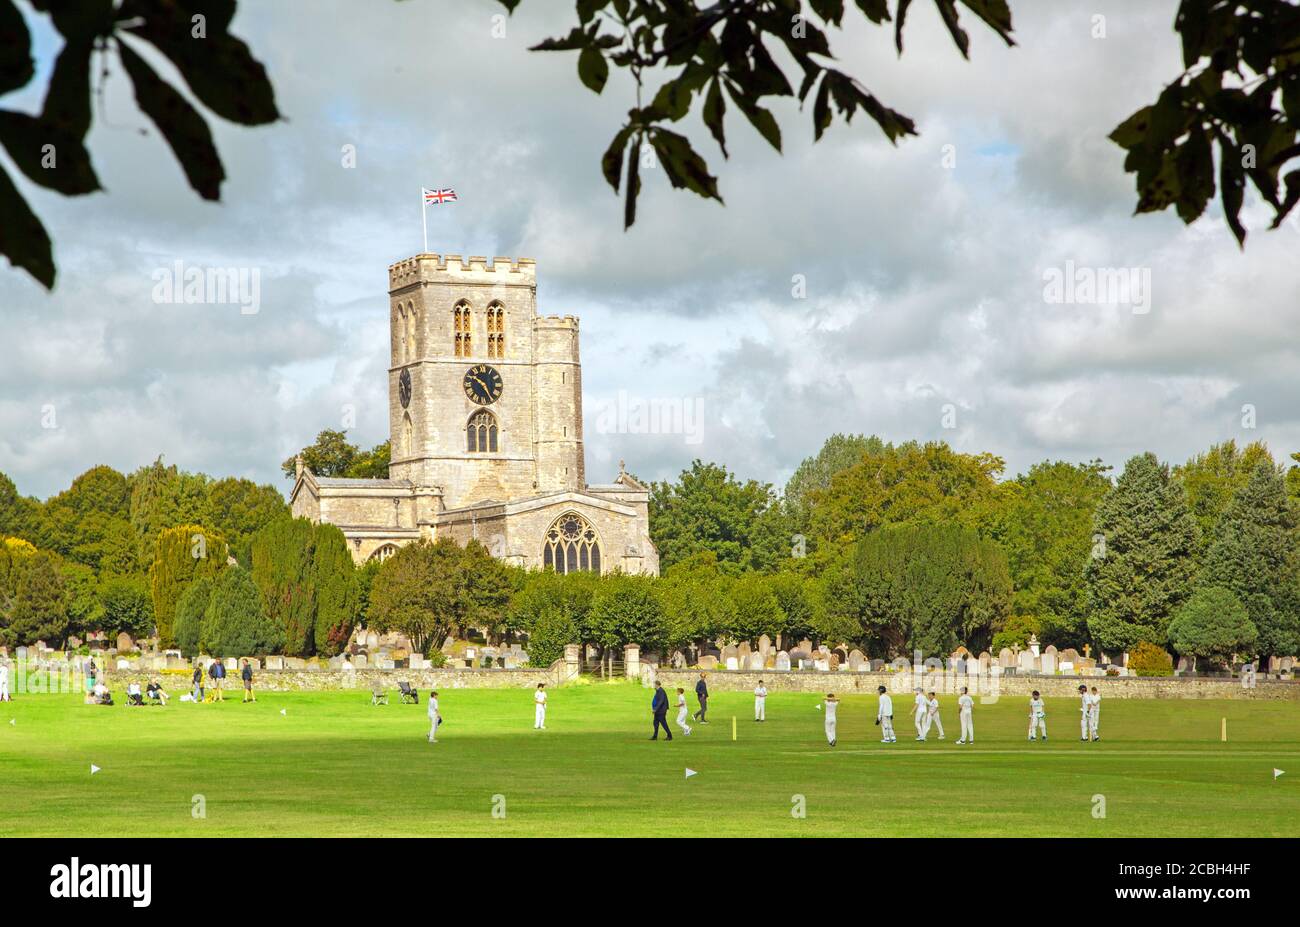 Junior youth cricket match on the picturesque church meadow the home of Thame cricket club Oxfordshire England with St Mary's church in the background Stock Photo